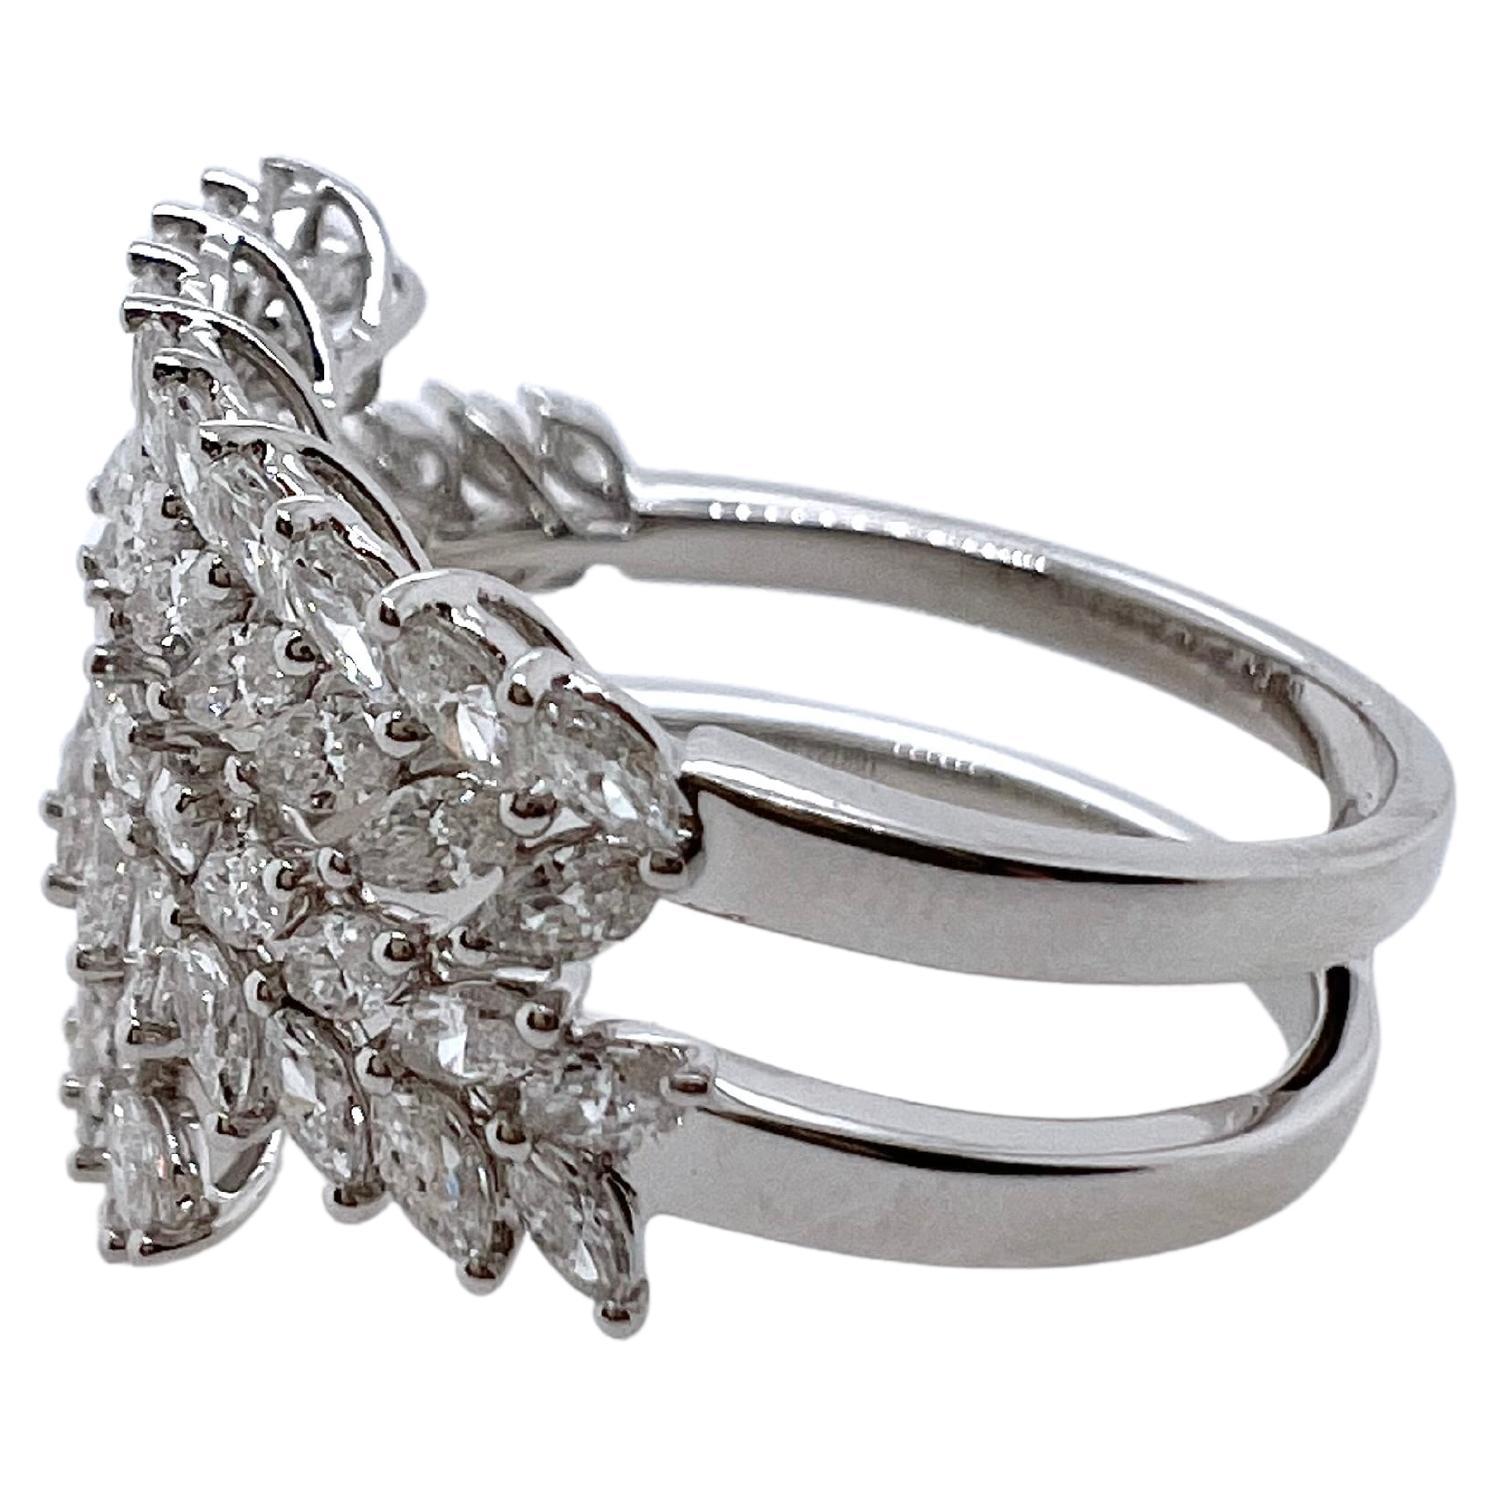 A fabulous ring that will get everyone's attention! The marquise diamonds are set and arranged to mimic a wreath
pattern that is absolutely stunning.  The 3 rows of diamonds are arranged to give your finger the perfect look!



Size: 7 (can be